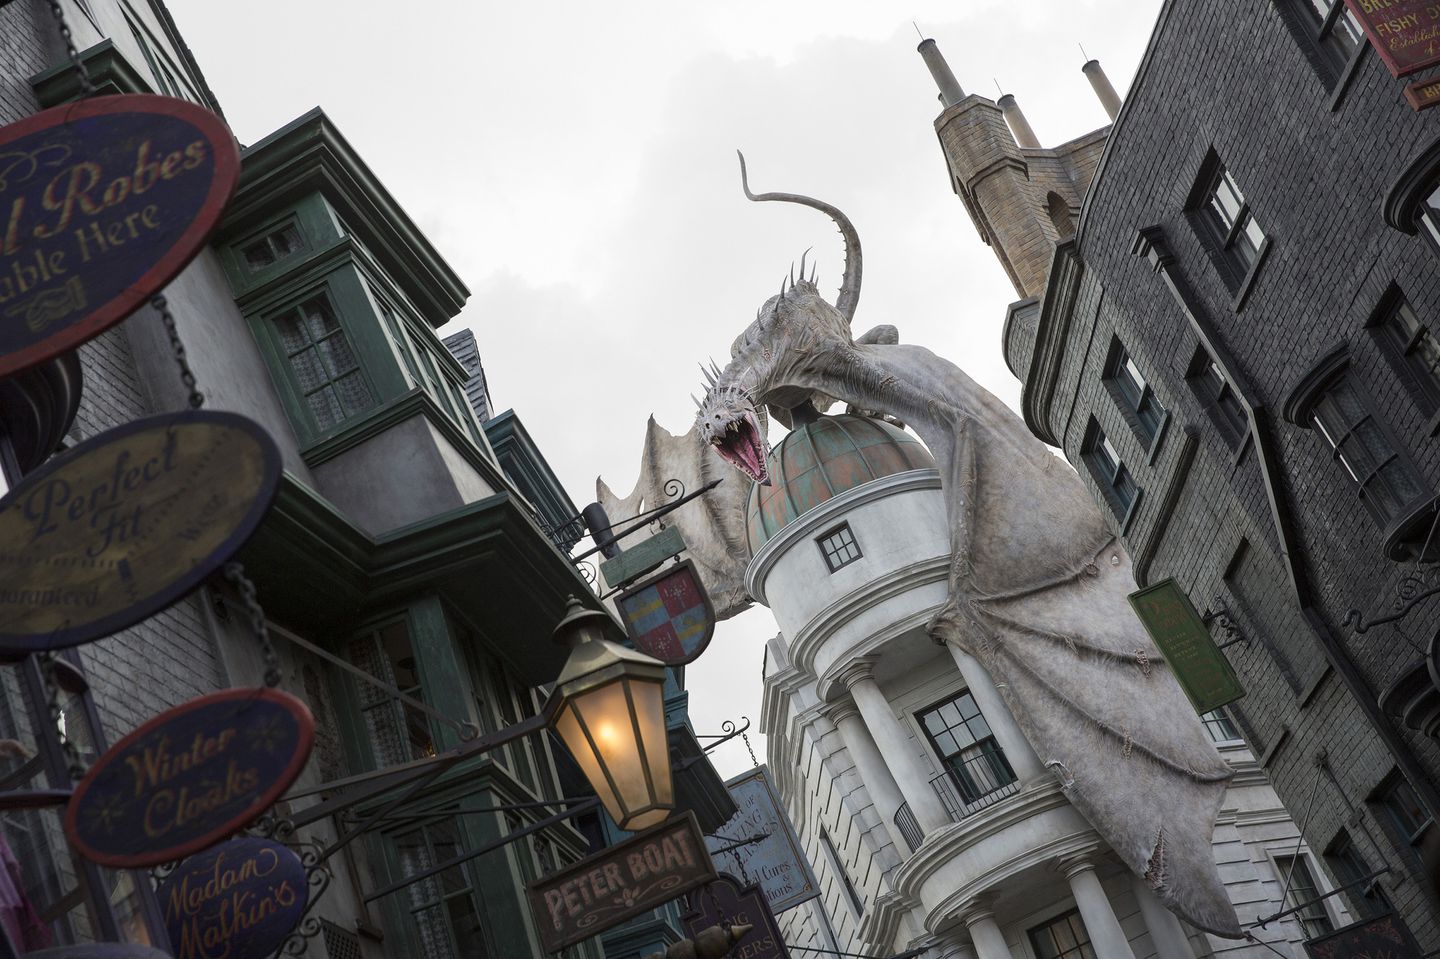 Diagon Alley from Harry Potter - The Verge